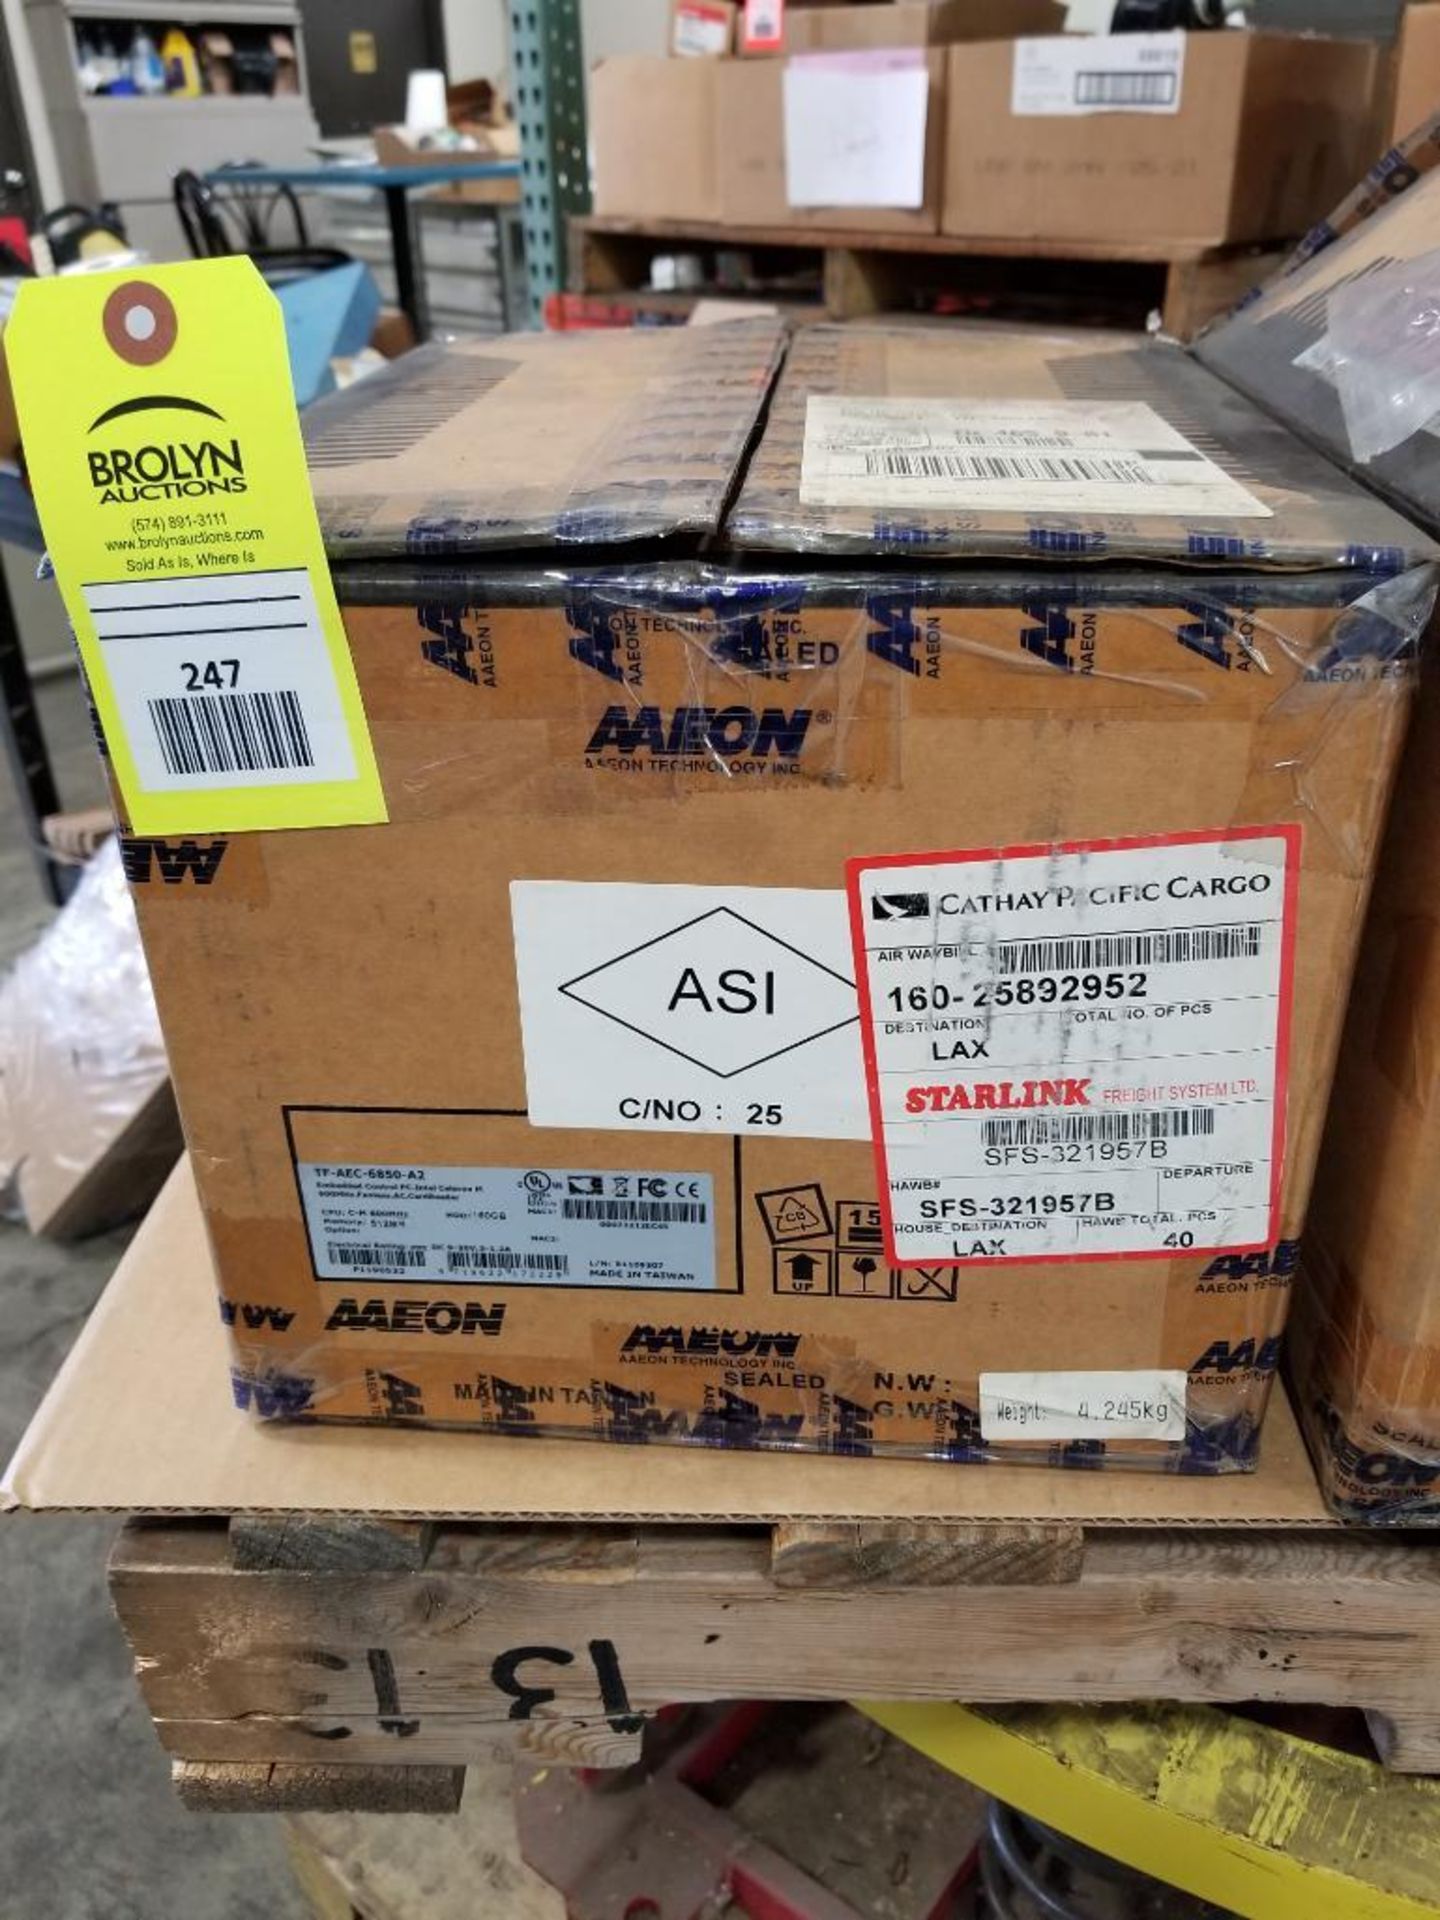 AAEON embedded control PC. Model TF-AEC-6850-A2. New in box.